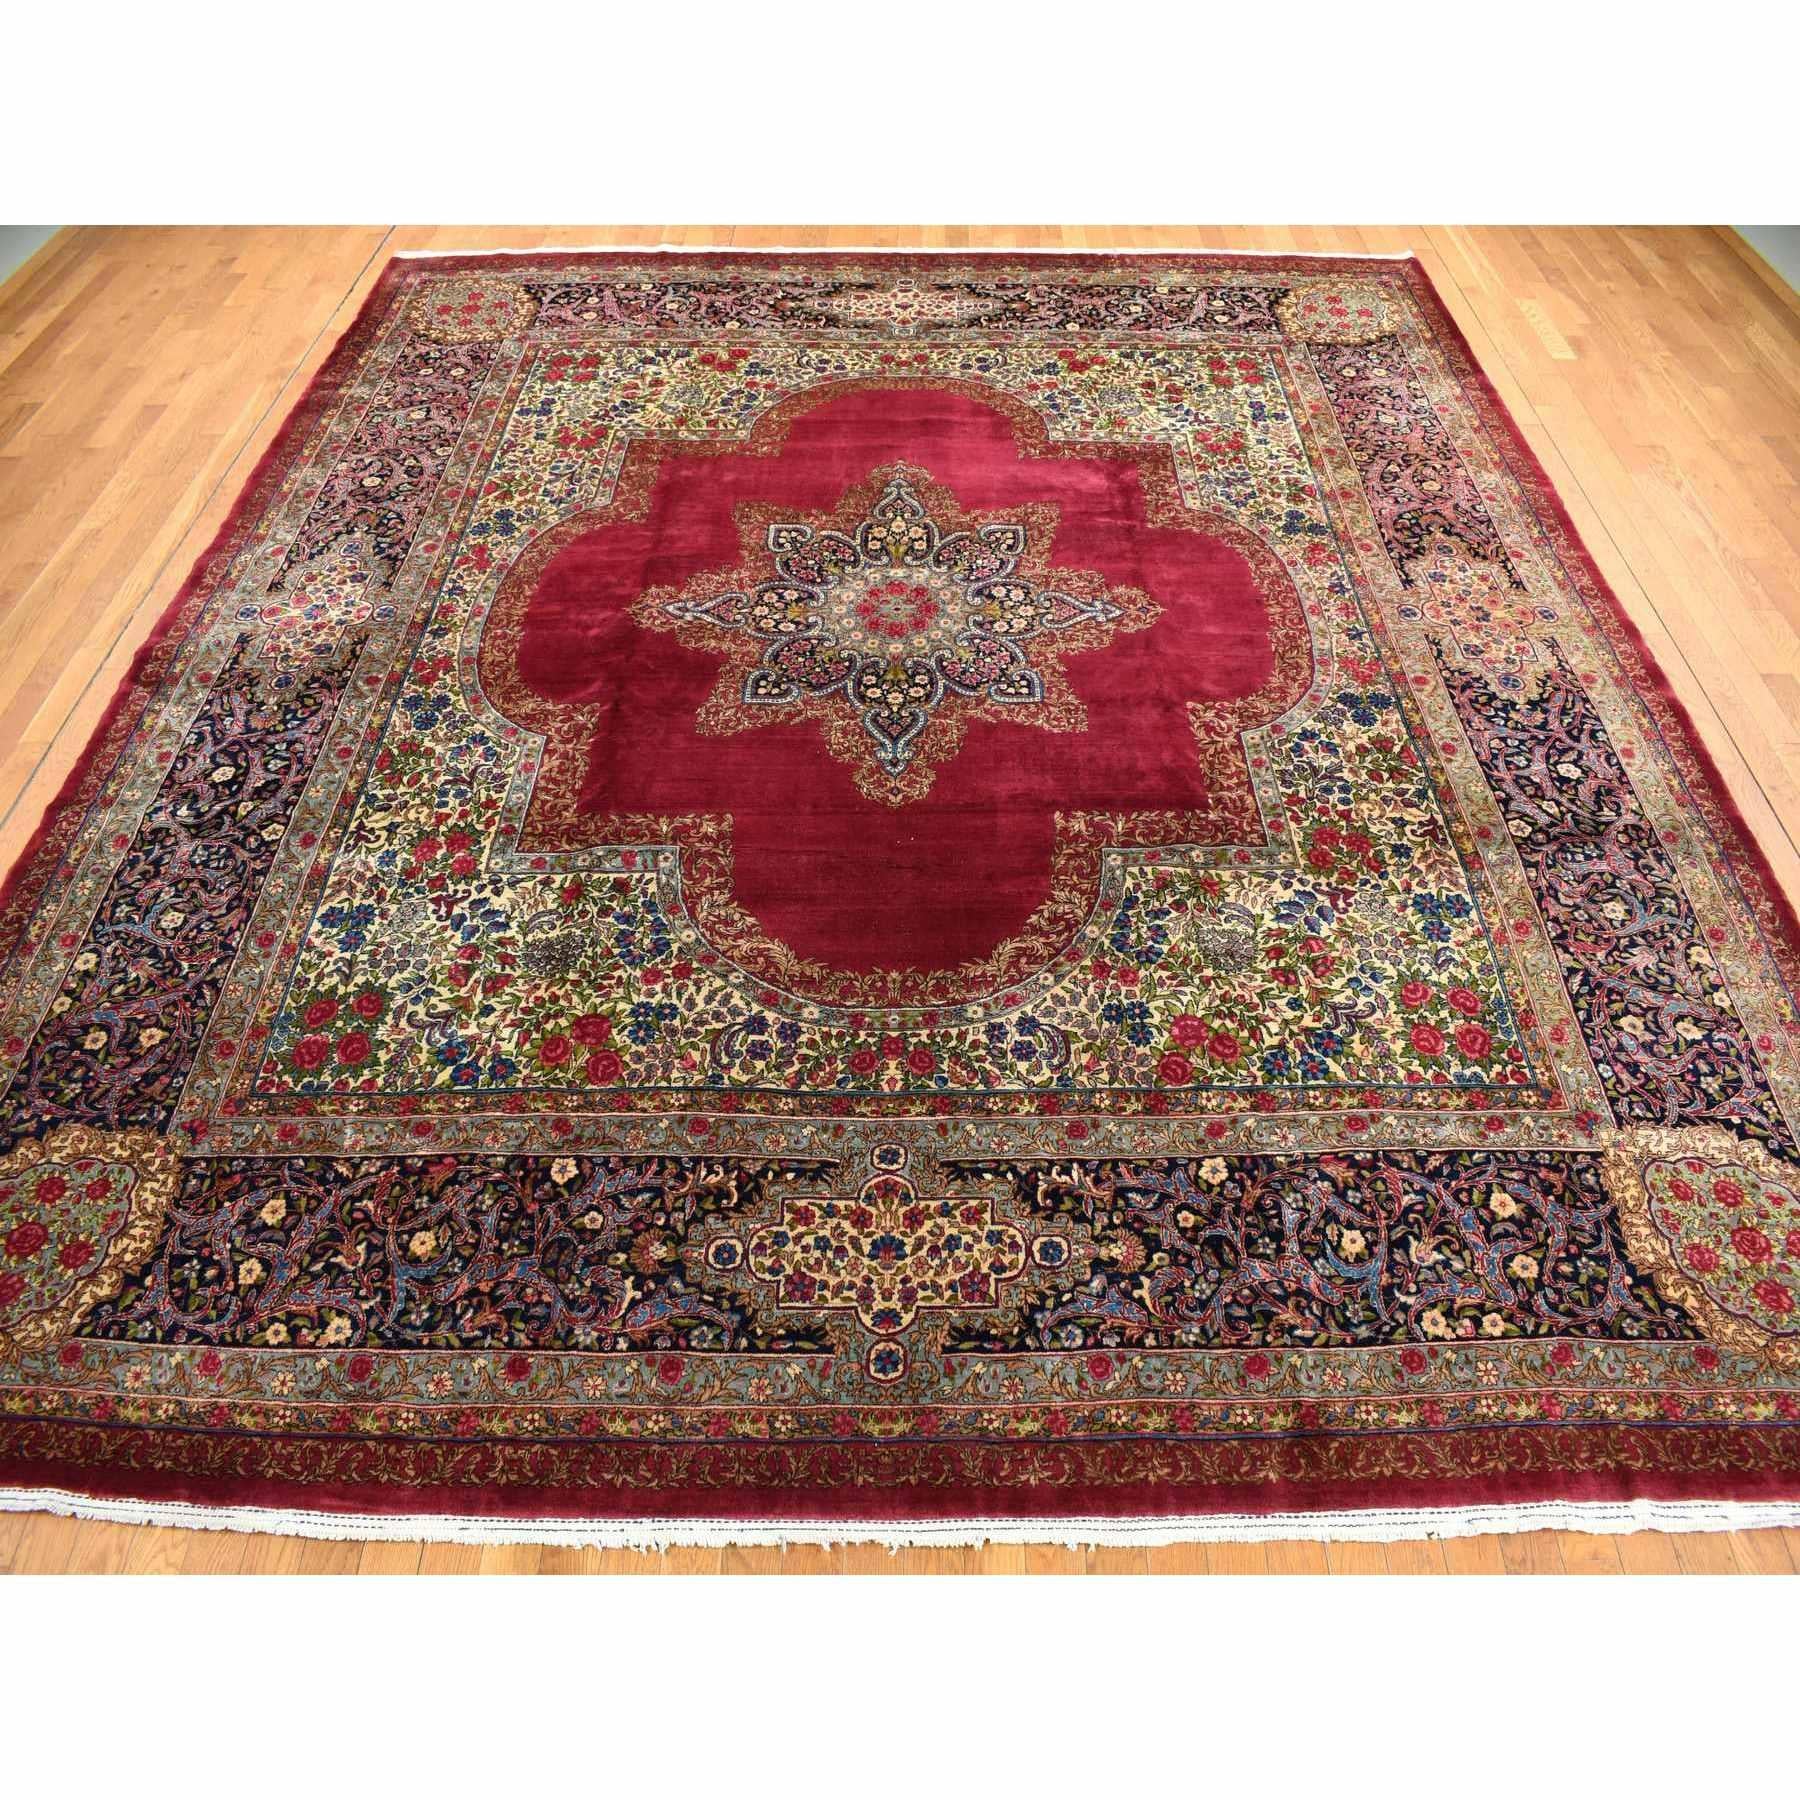 This fabulous Hand-Knotted carpet has been created and designed for extra strength and durability. This rug has been handcrafted for weeks in the traditional method that is used to make
Exact Rug Size in Feet and Inches : 11'8